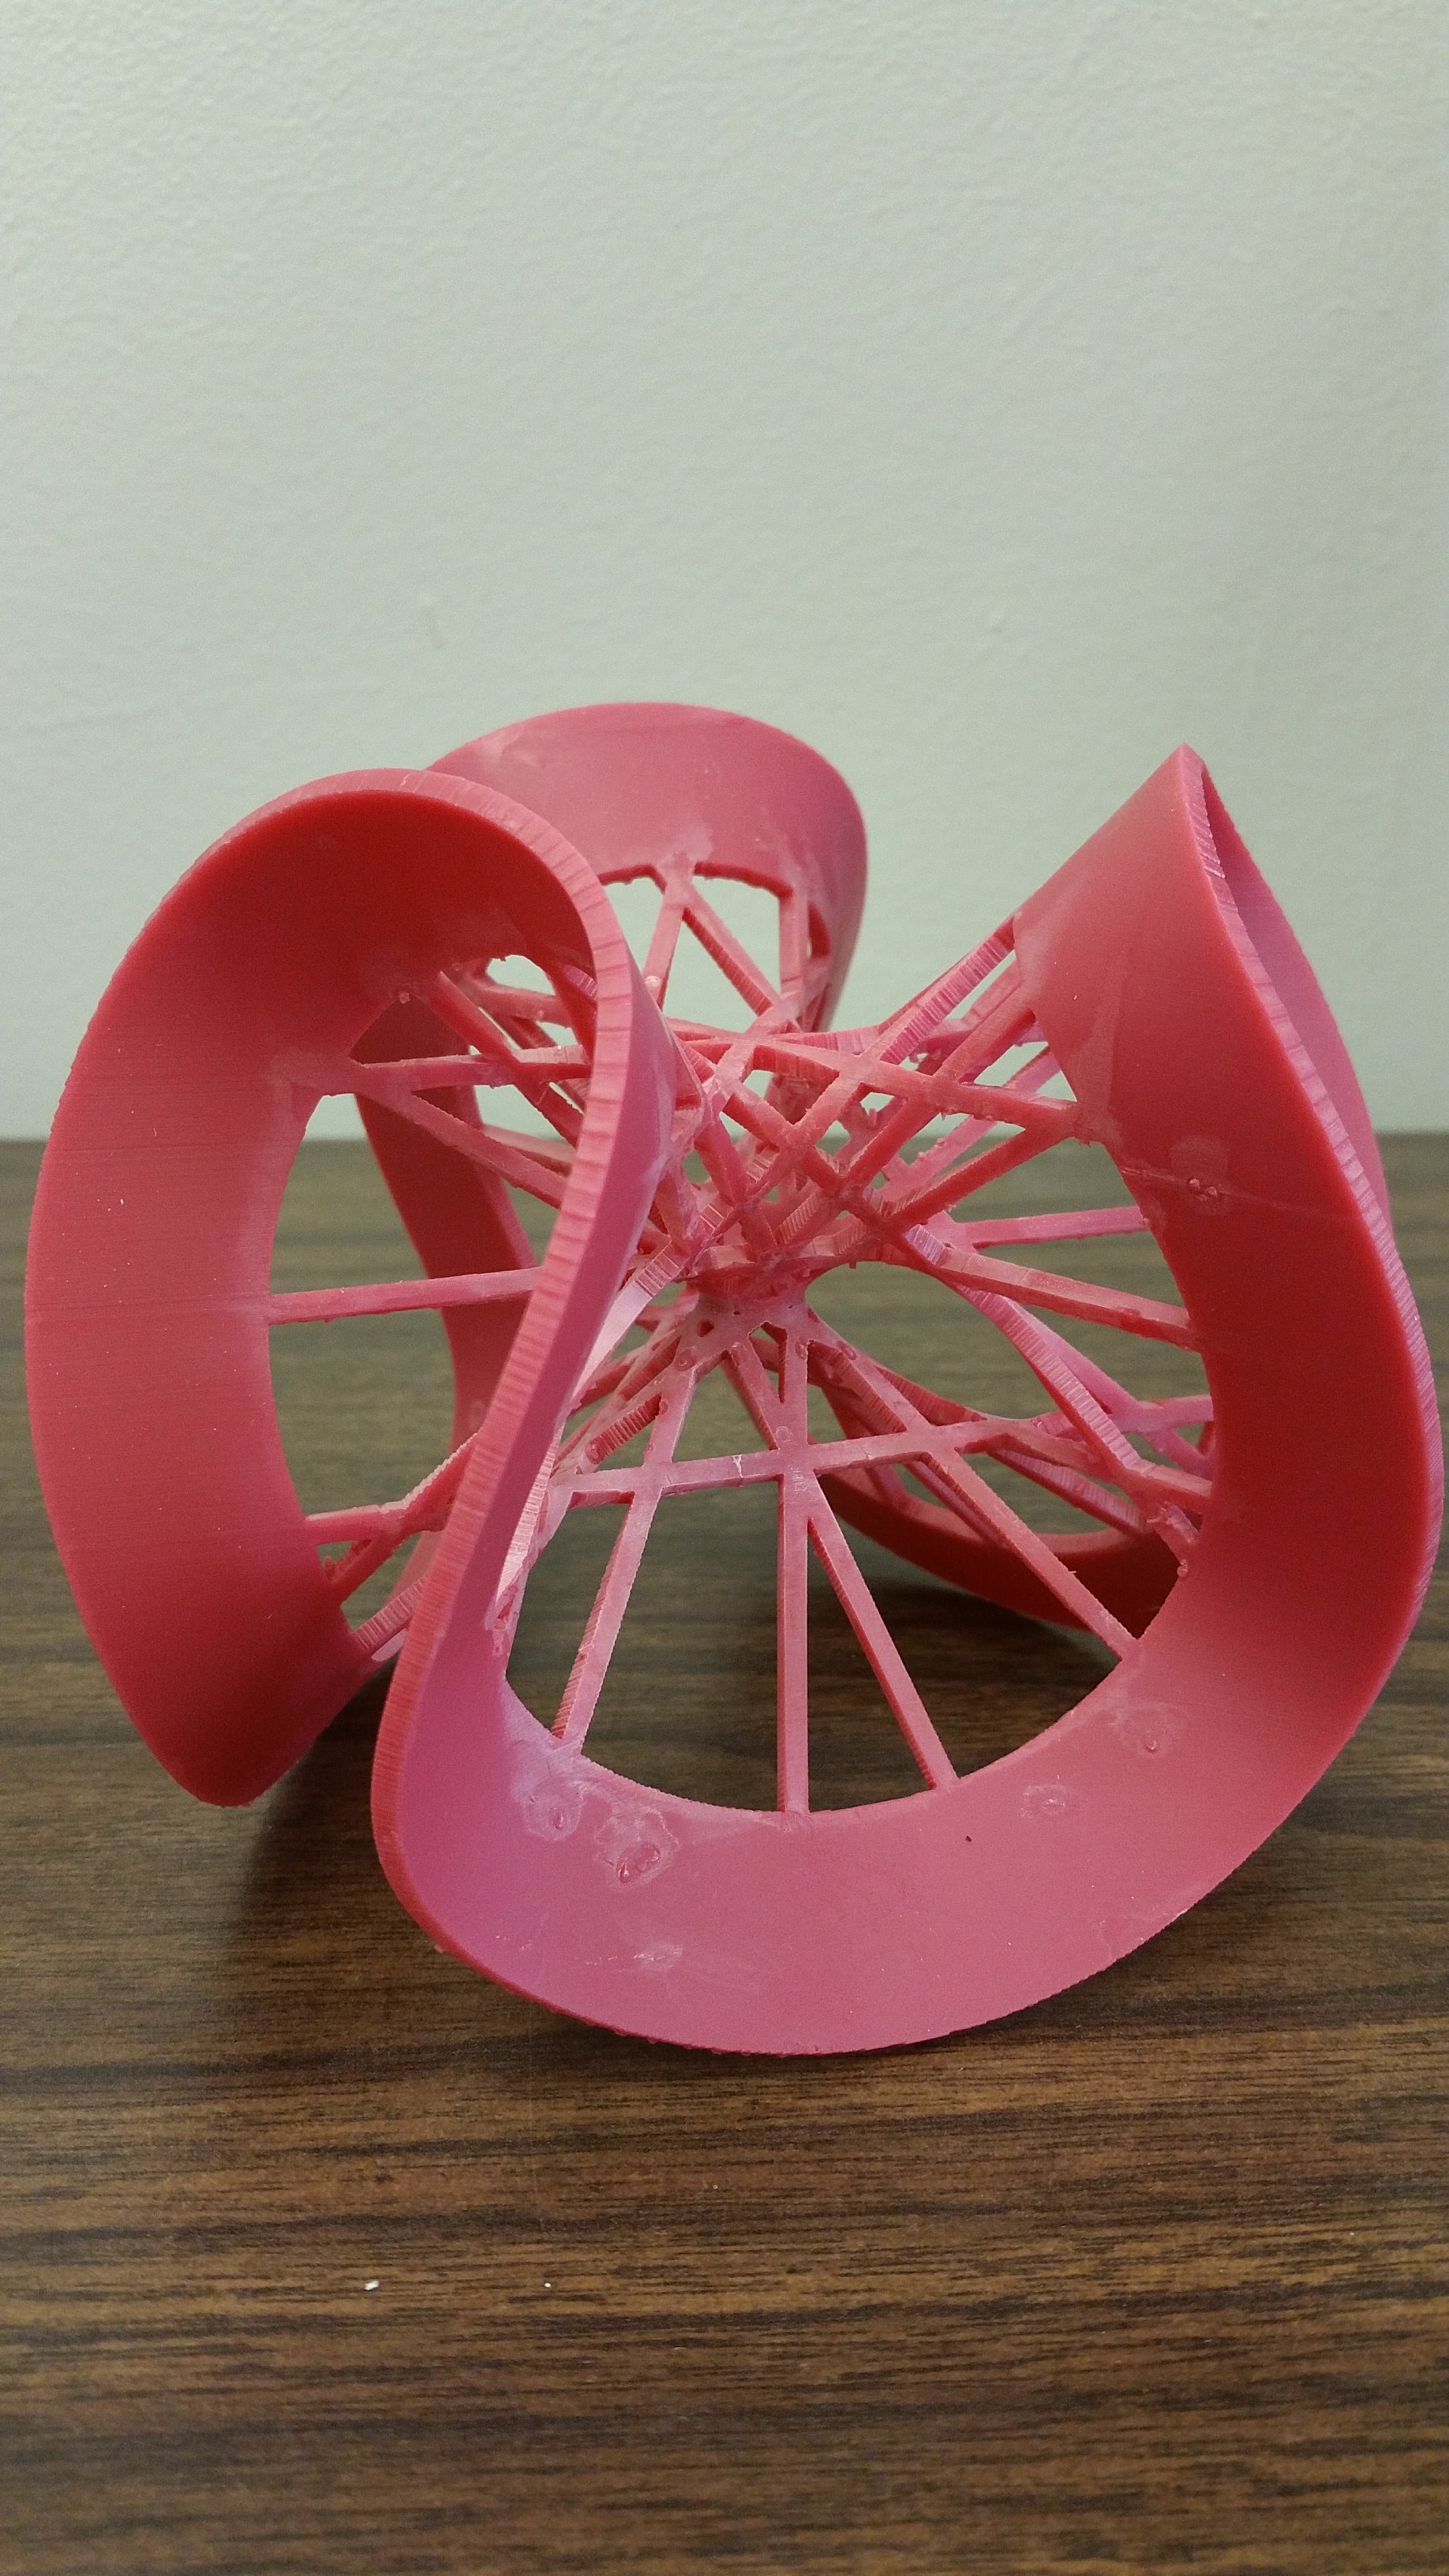 3D-printed Clebsch surface